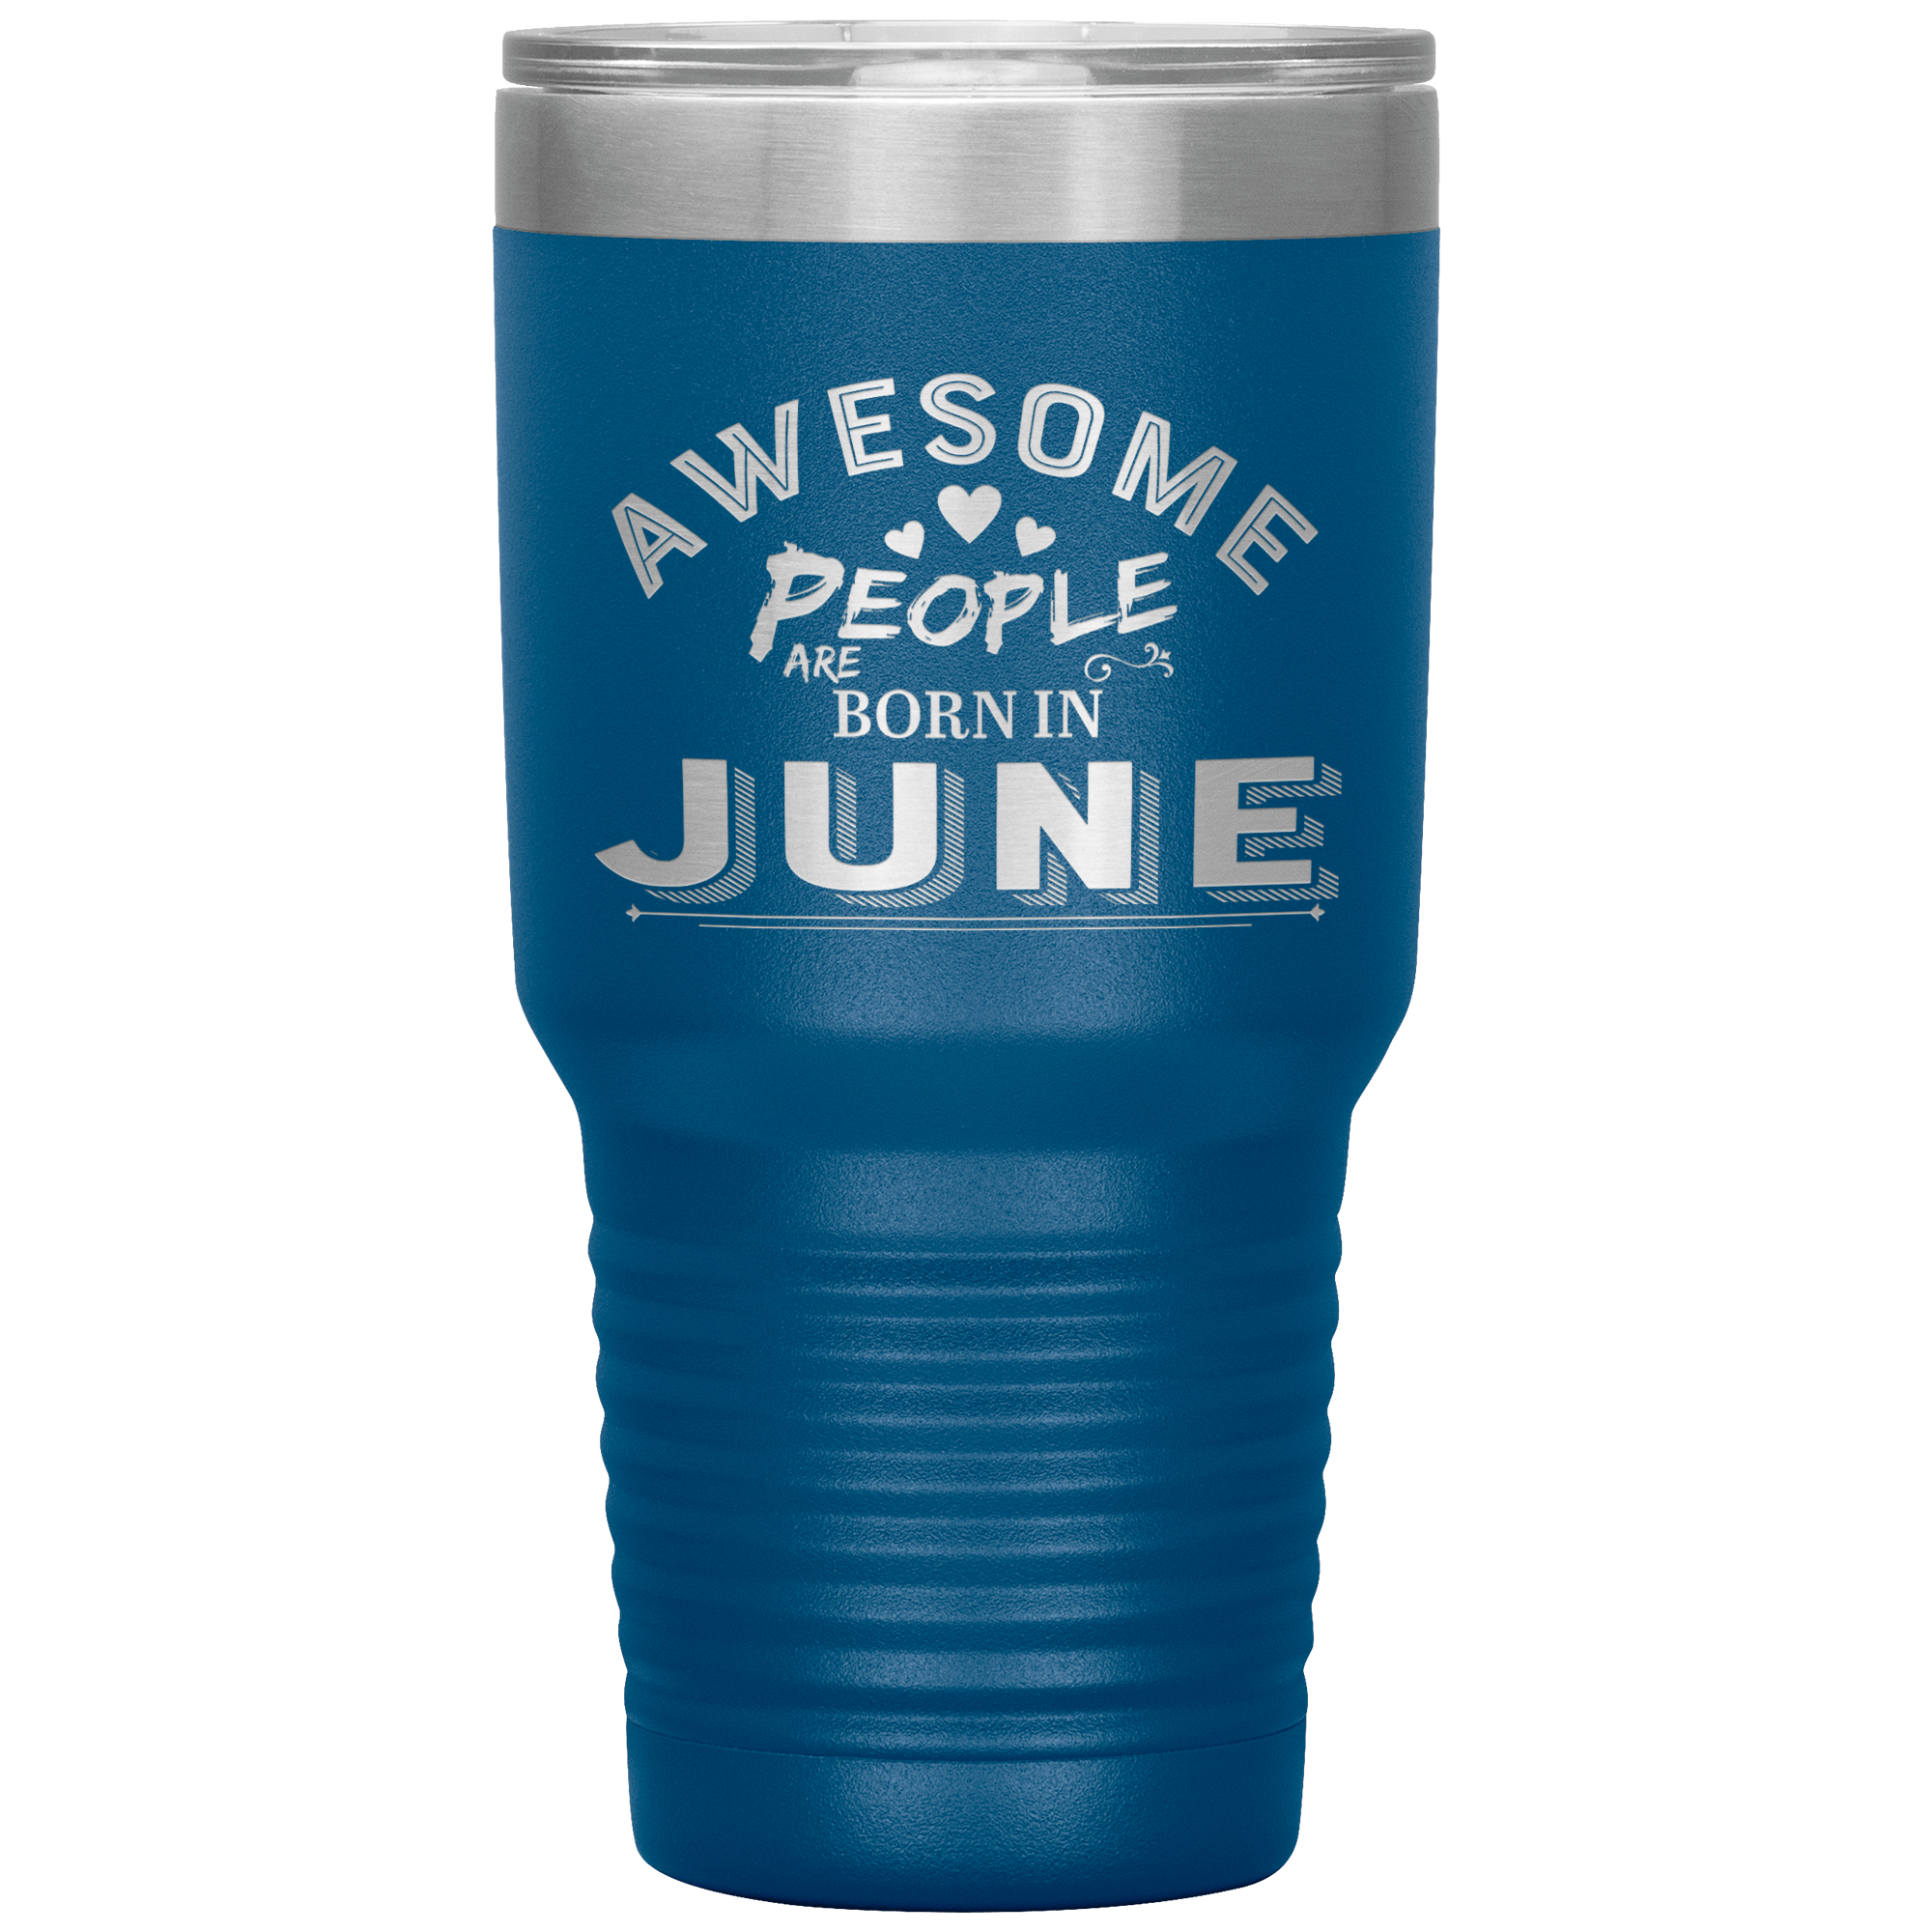 "AWESOME PEOPLE ARE BORN IN JUNE" Tumbler